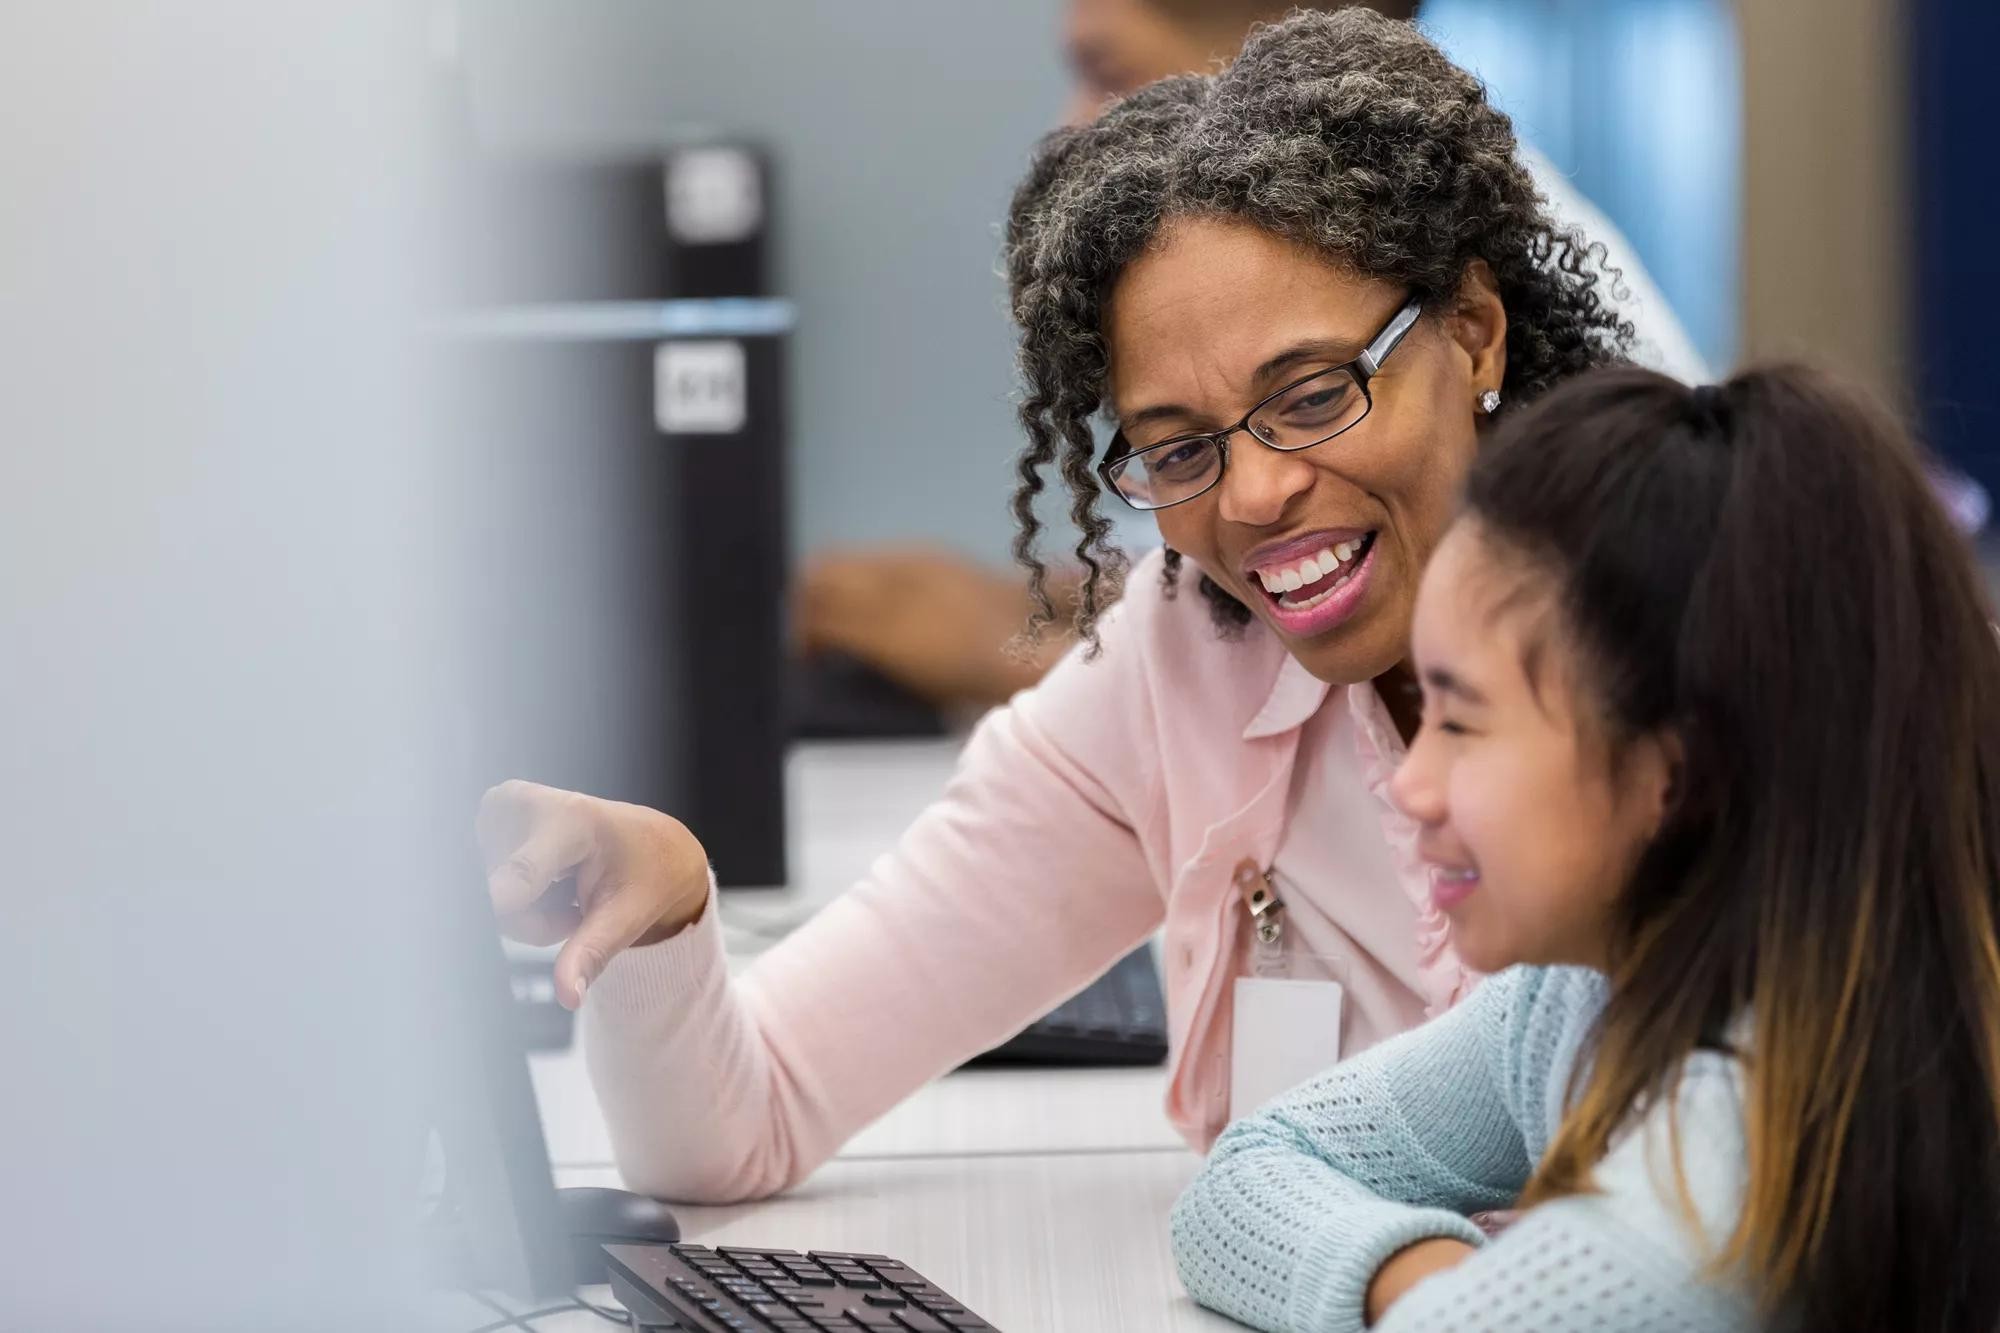 African American female school teacher points to something on computer while helping a female student during technology class.